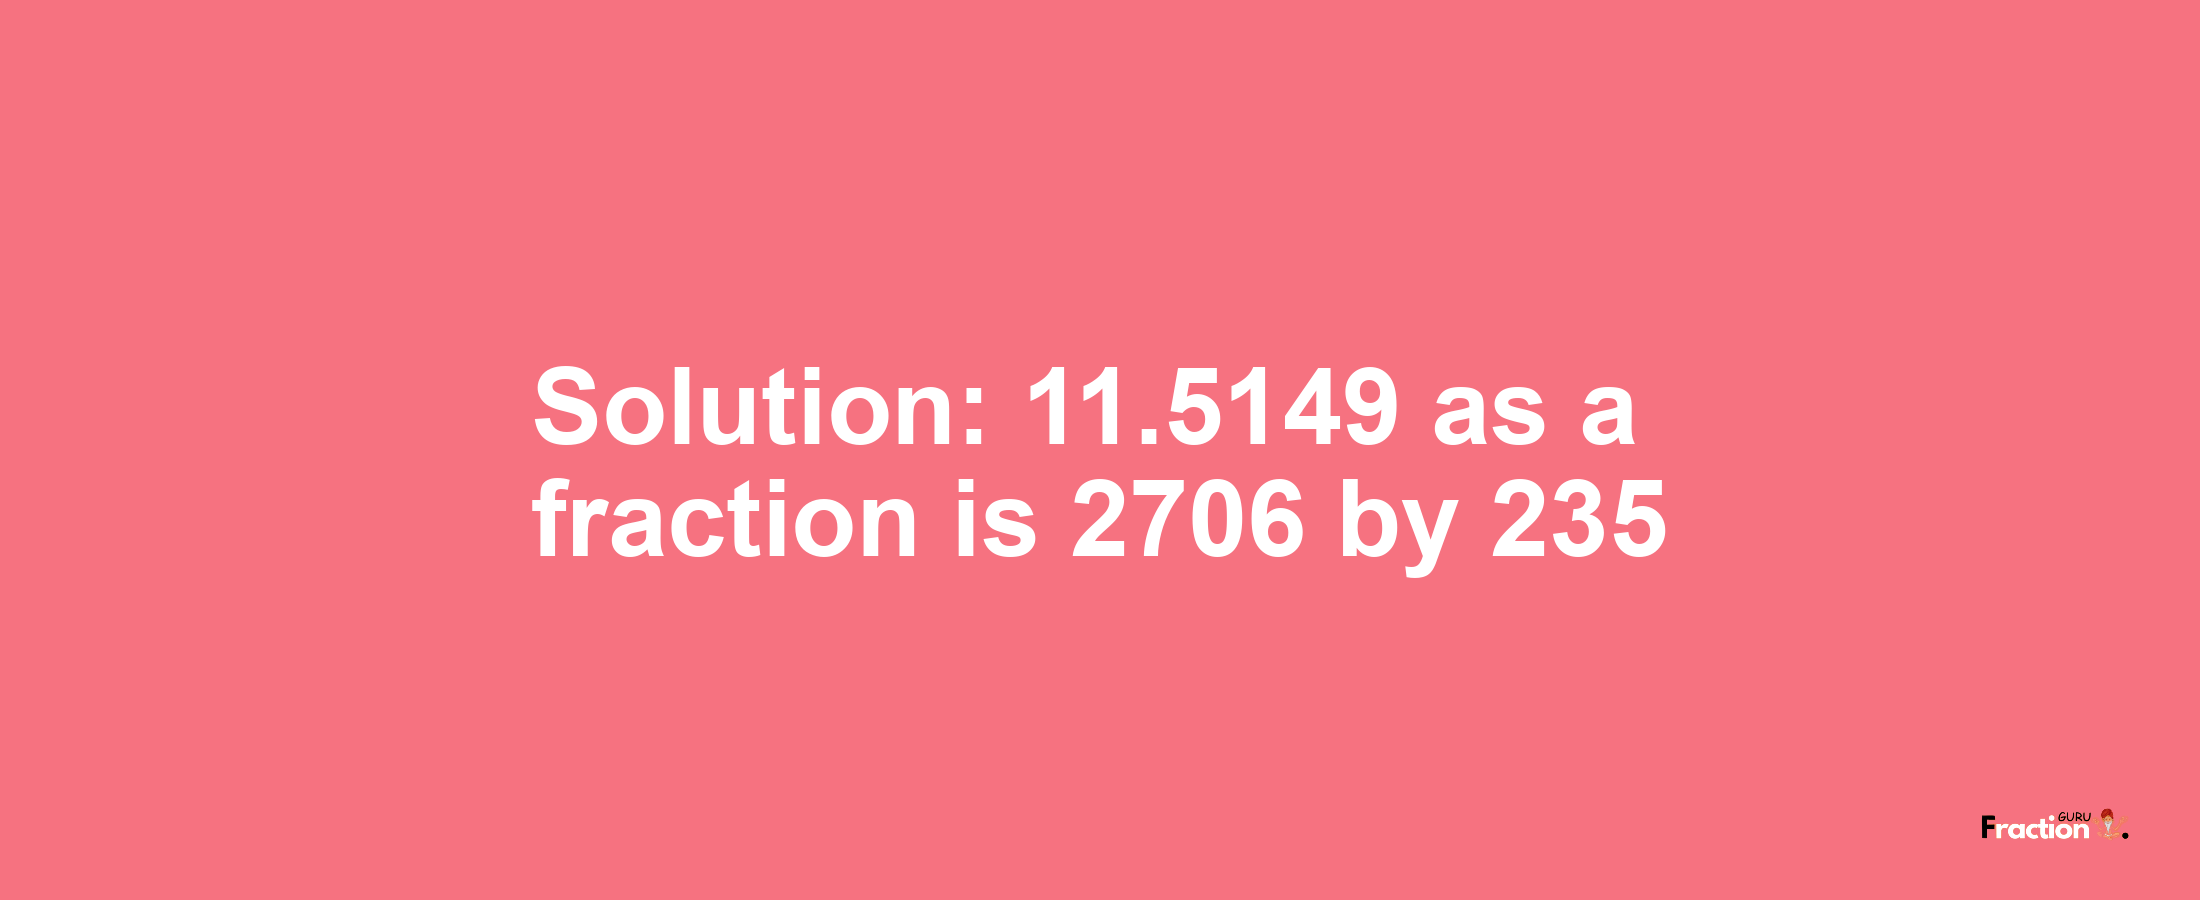 Solution:11.5149 as a fraction is 2706/235